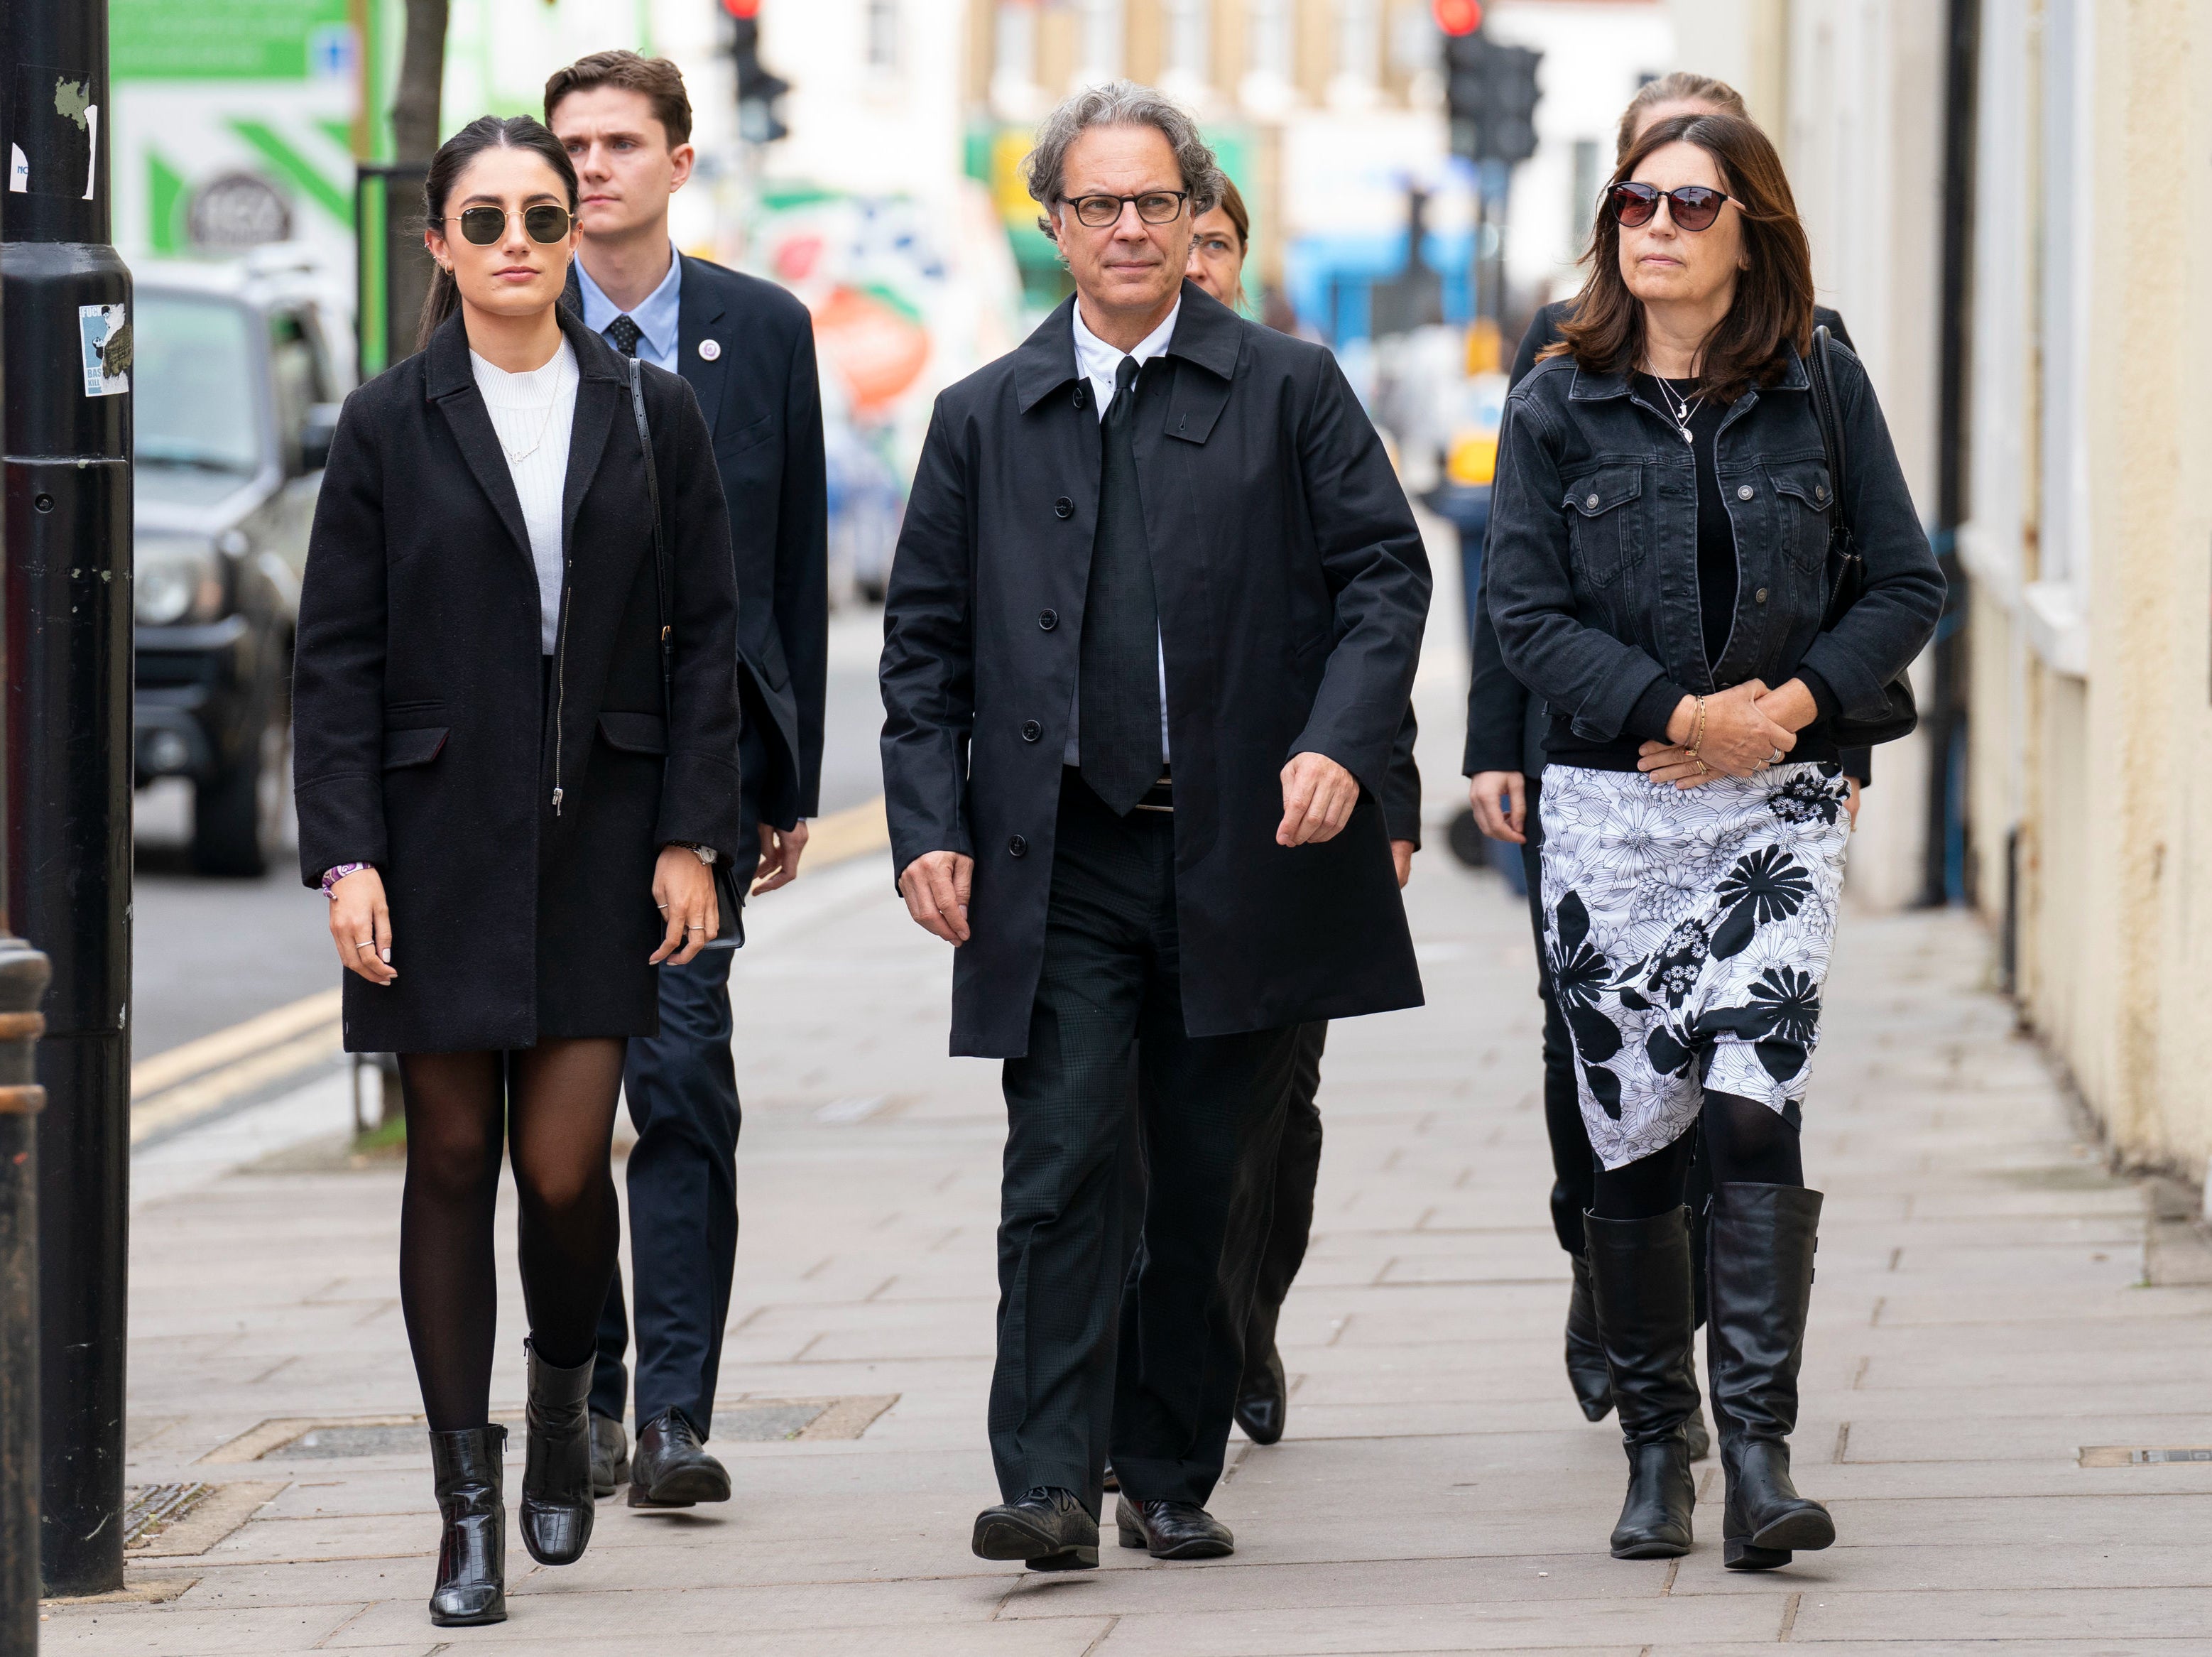 Molly Russell’s father Ian Russell (centre), mother Janet Russell (right) and her sister (left) arriving at Barnet Coroner’s Court on the first day of the inquest into her death